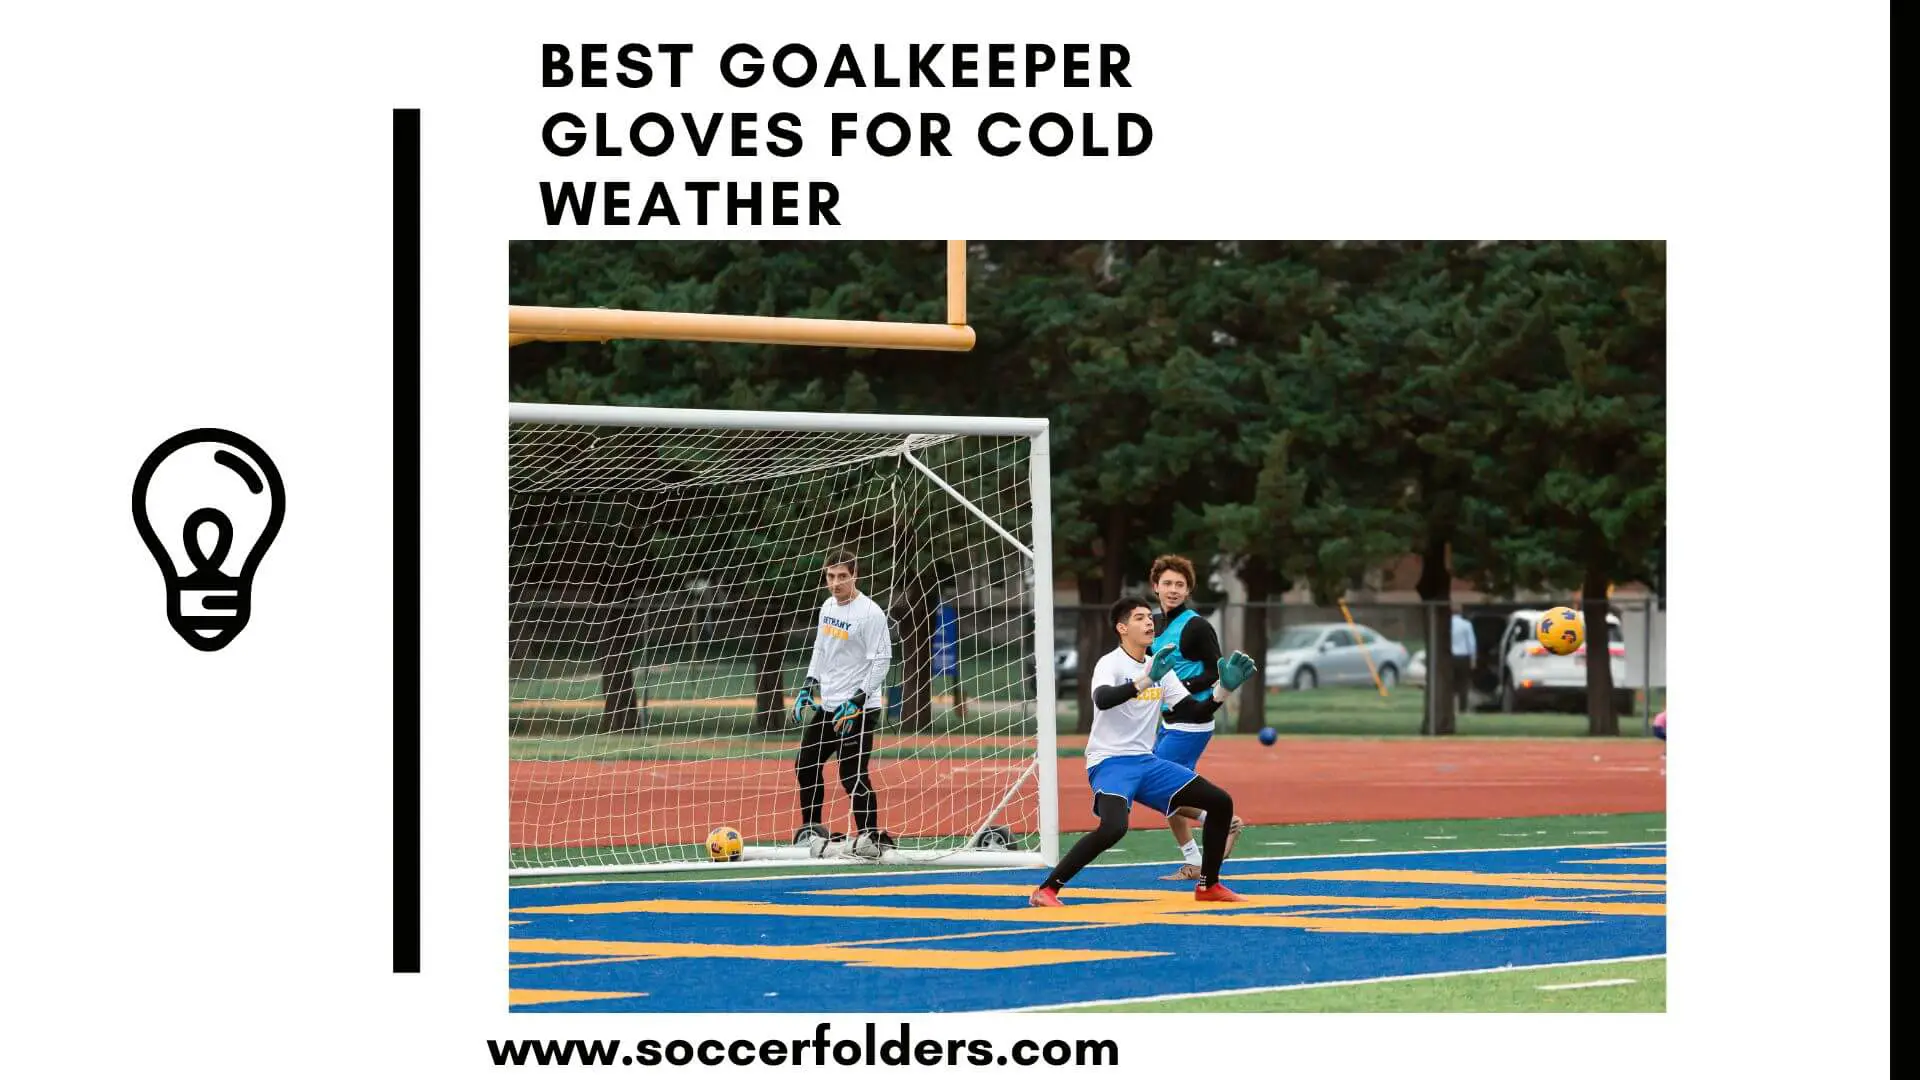 best goalkeeper gloves for cold weather - Featured Image